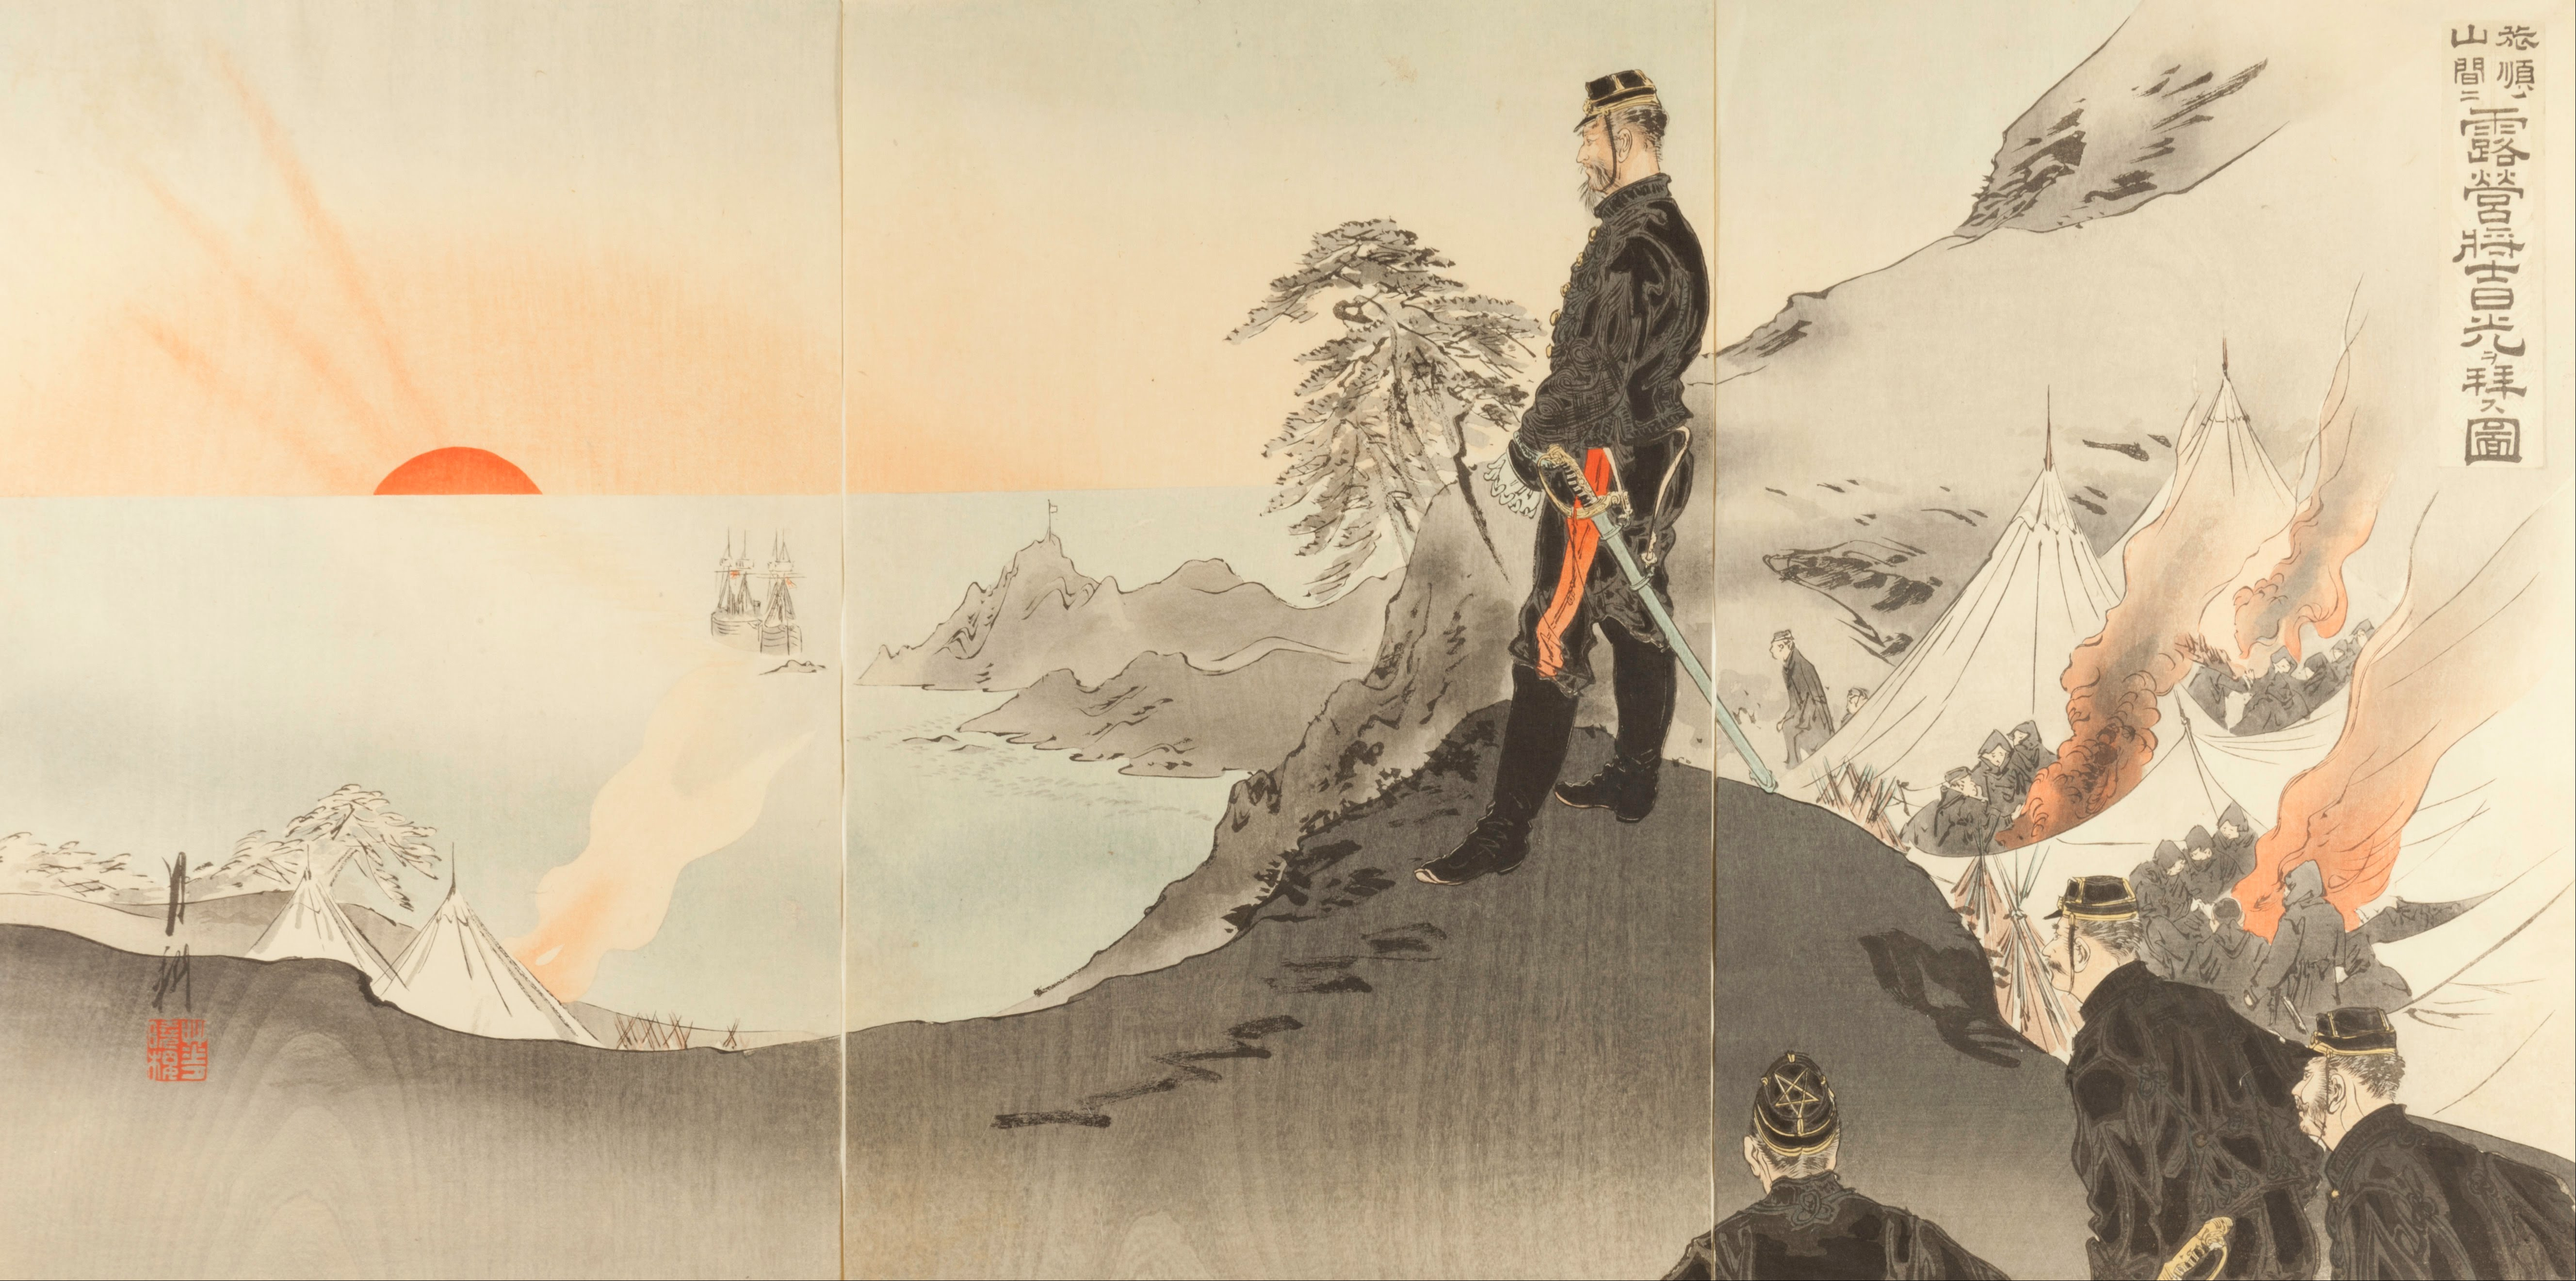 Ogata_Gekko_-_Picture_of_Officers_and_Men_Worshiping_the_Rising_Sun_While_Encamped_in_the_Mountains_of_Port_Arthur_-_Google_Art_Project.jpg